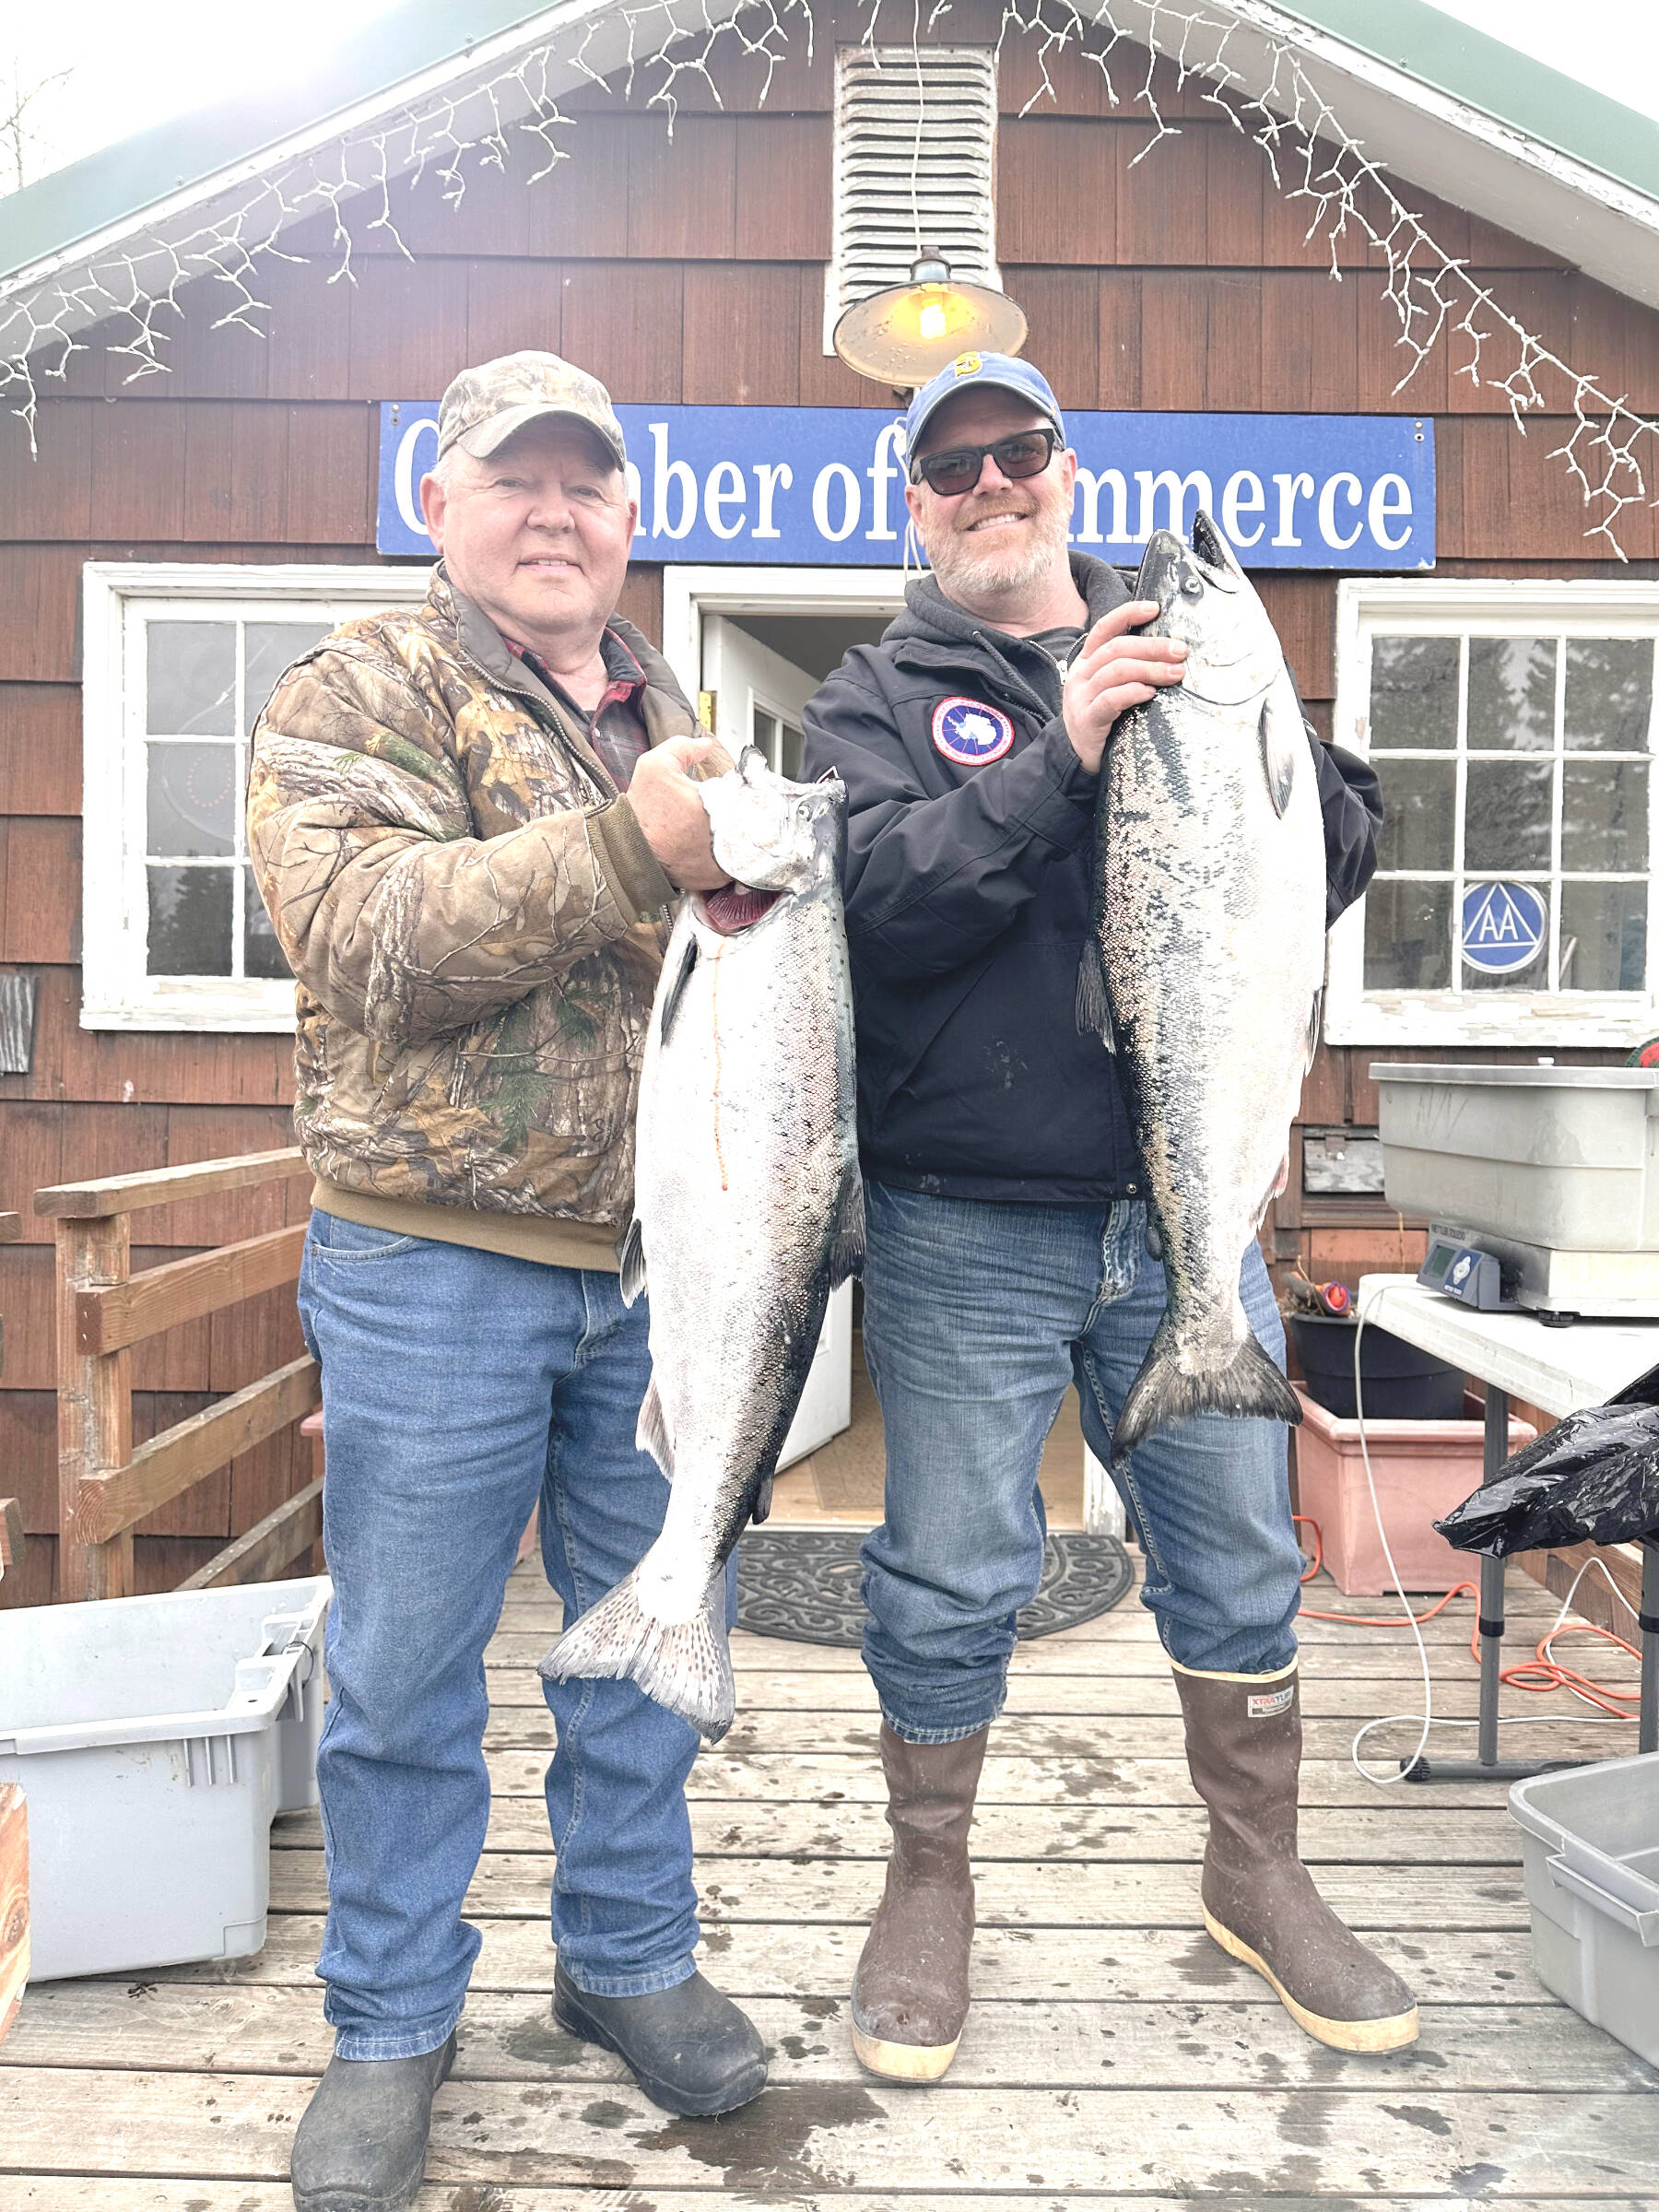 The 28th annual Anchor Point King Salmon Tournament third place winner, Joe Marx (right) holds up his fish during weigh-in on Saturday, May 6 at the Anchor Point Chamber of Commerce building in Anchor Point, Alaska. Photo courtesy of Mcki Needham